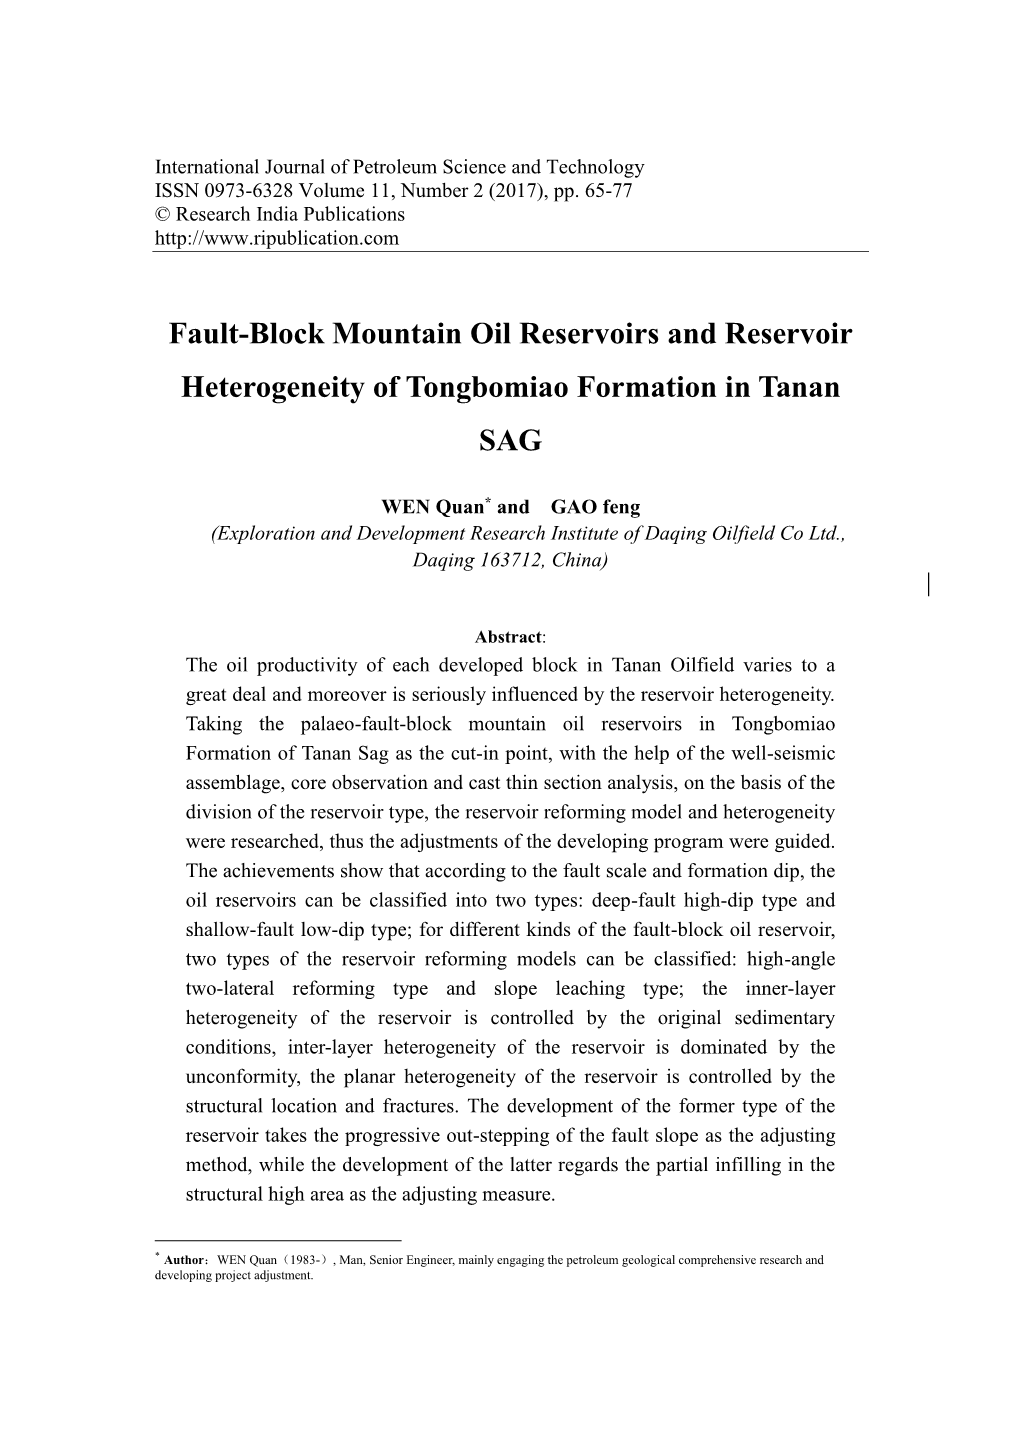 Fault-Block Mountain Oil Reservoirs and Reservoir Heterogeneity of Tongbomiao Formation in Tanan SAG